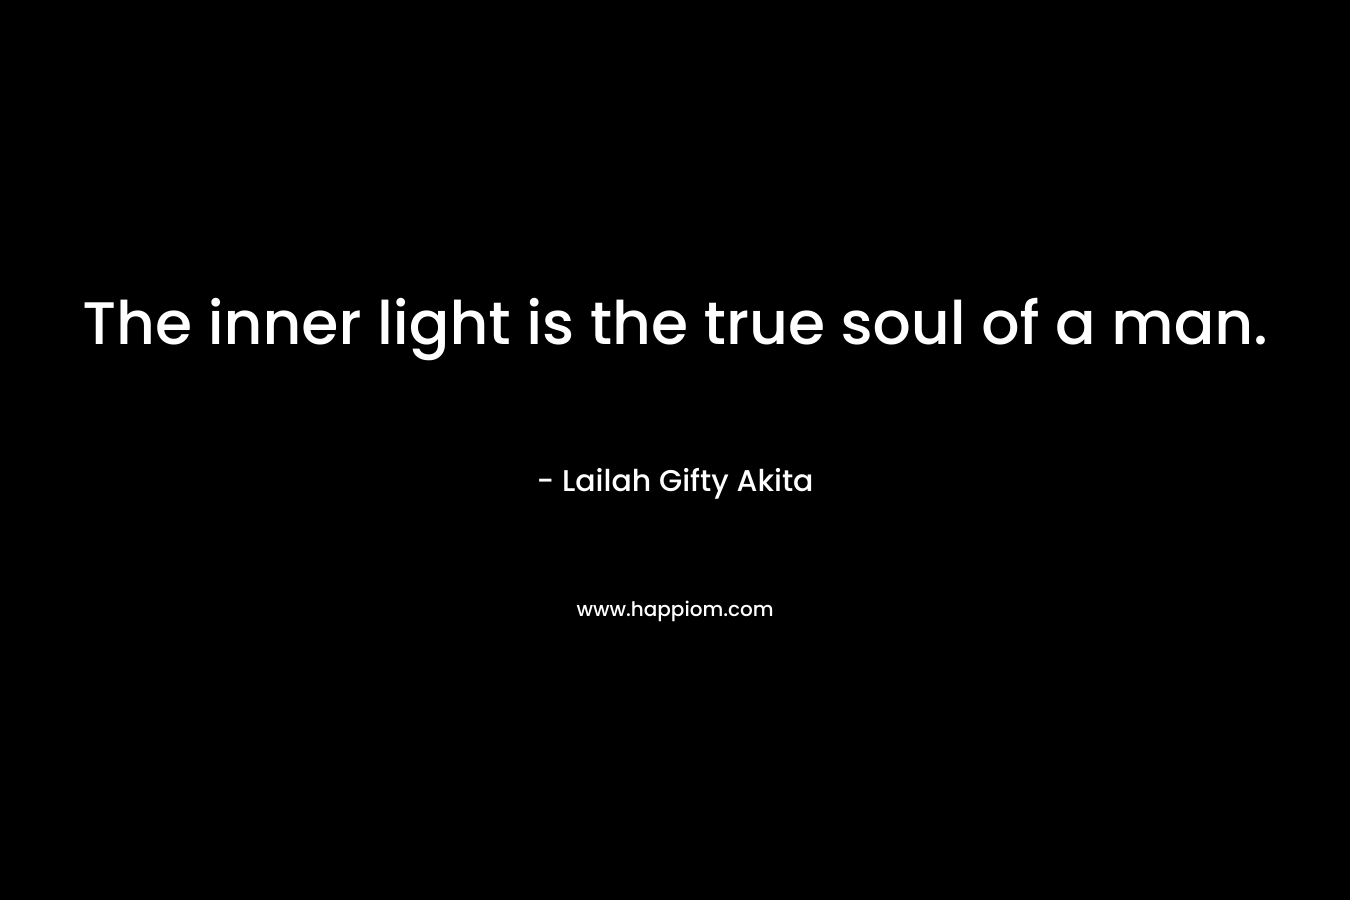 The inner light is the true soul of a man.